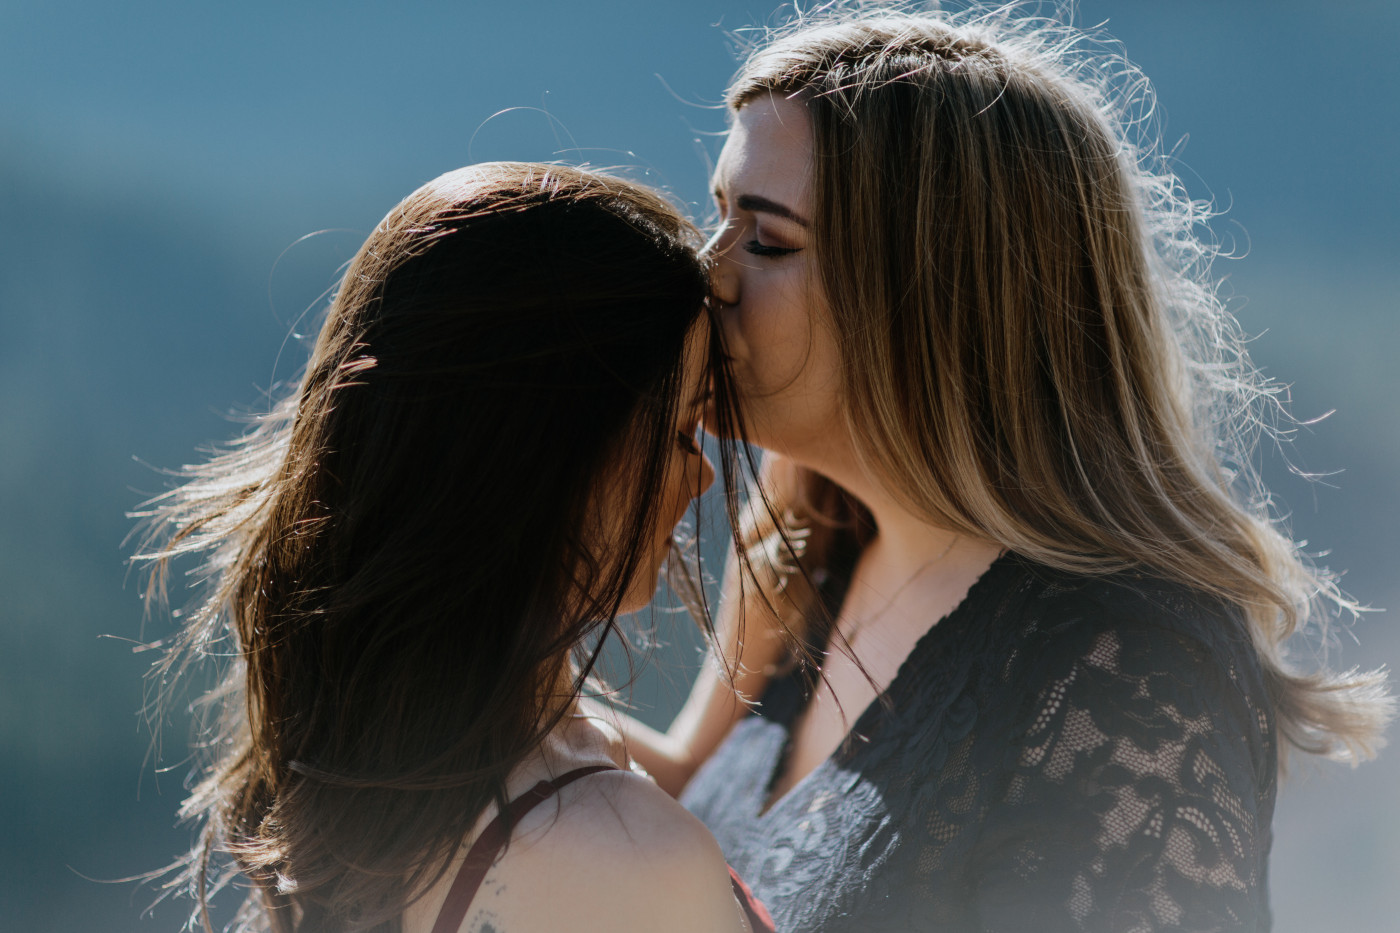 Tiffany and Hayley share a moment. Elopement photography at the Columbia River Gorge by Sienna Plus Josh.